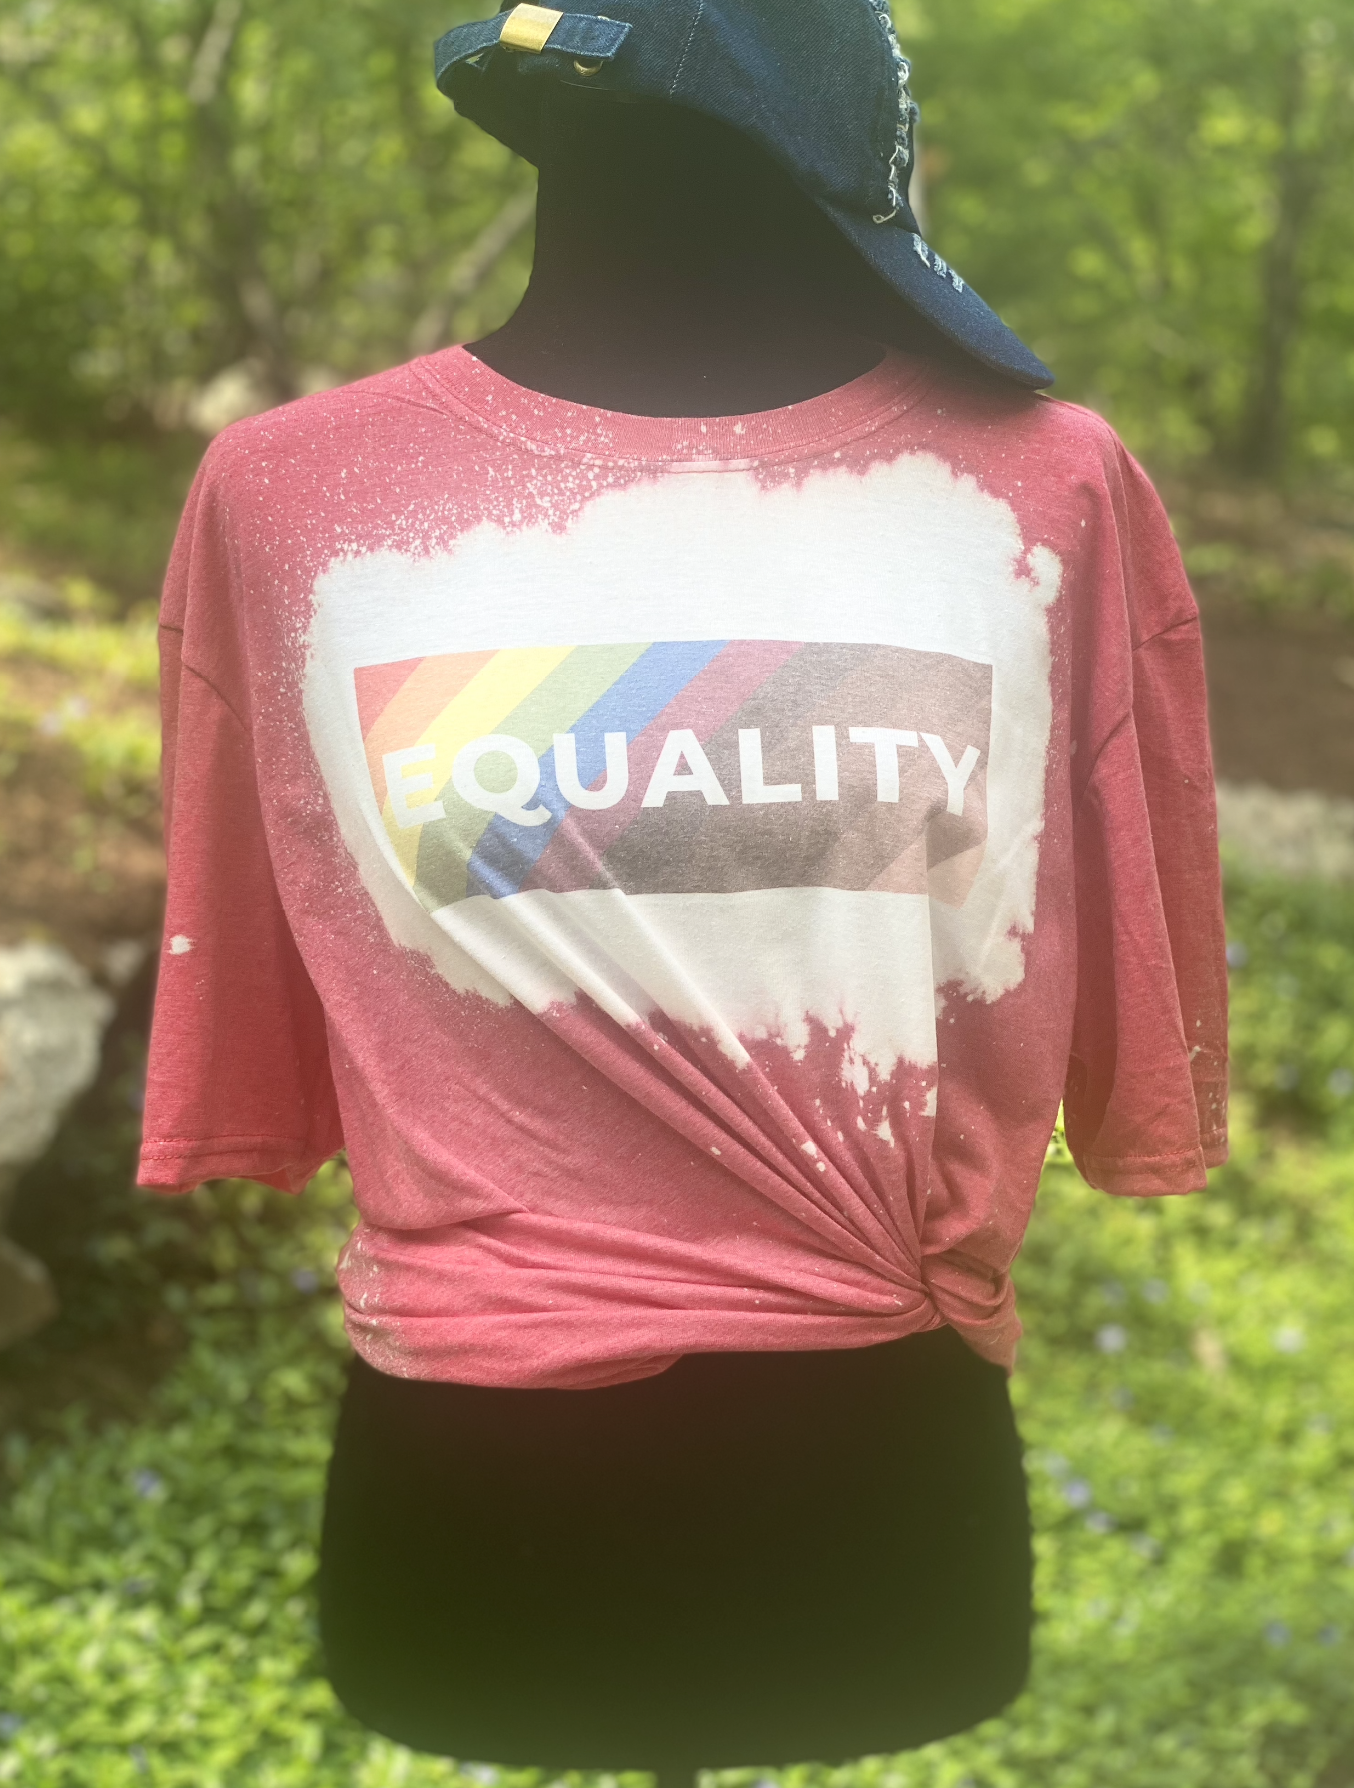 Equality bleached T-shirt